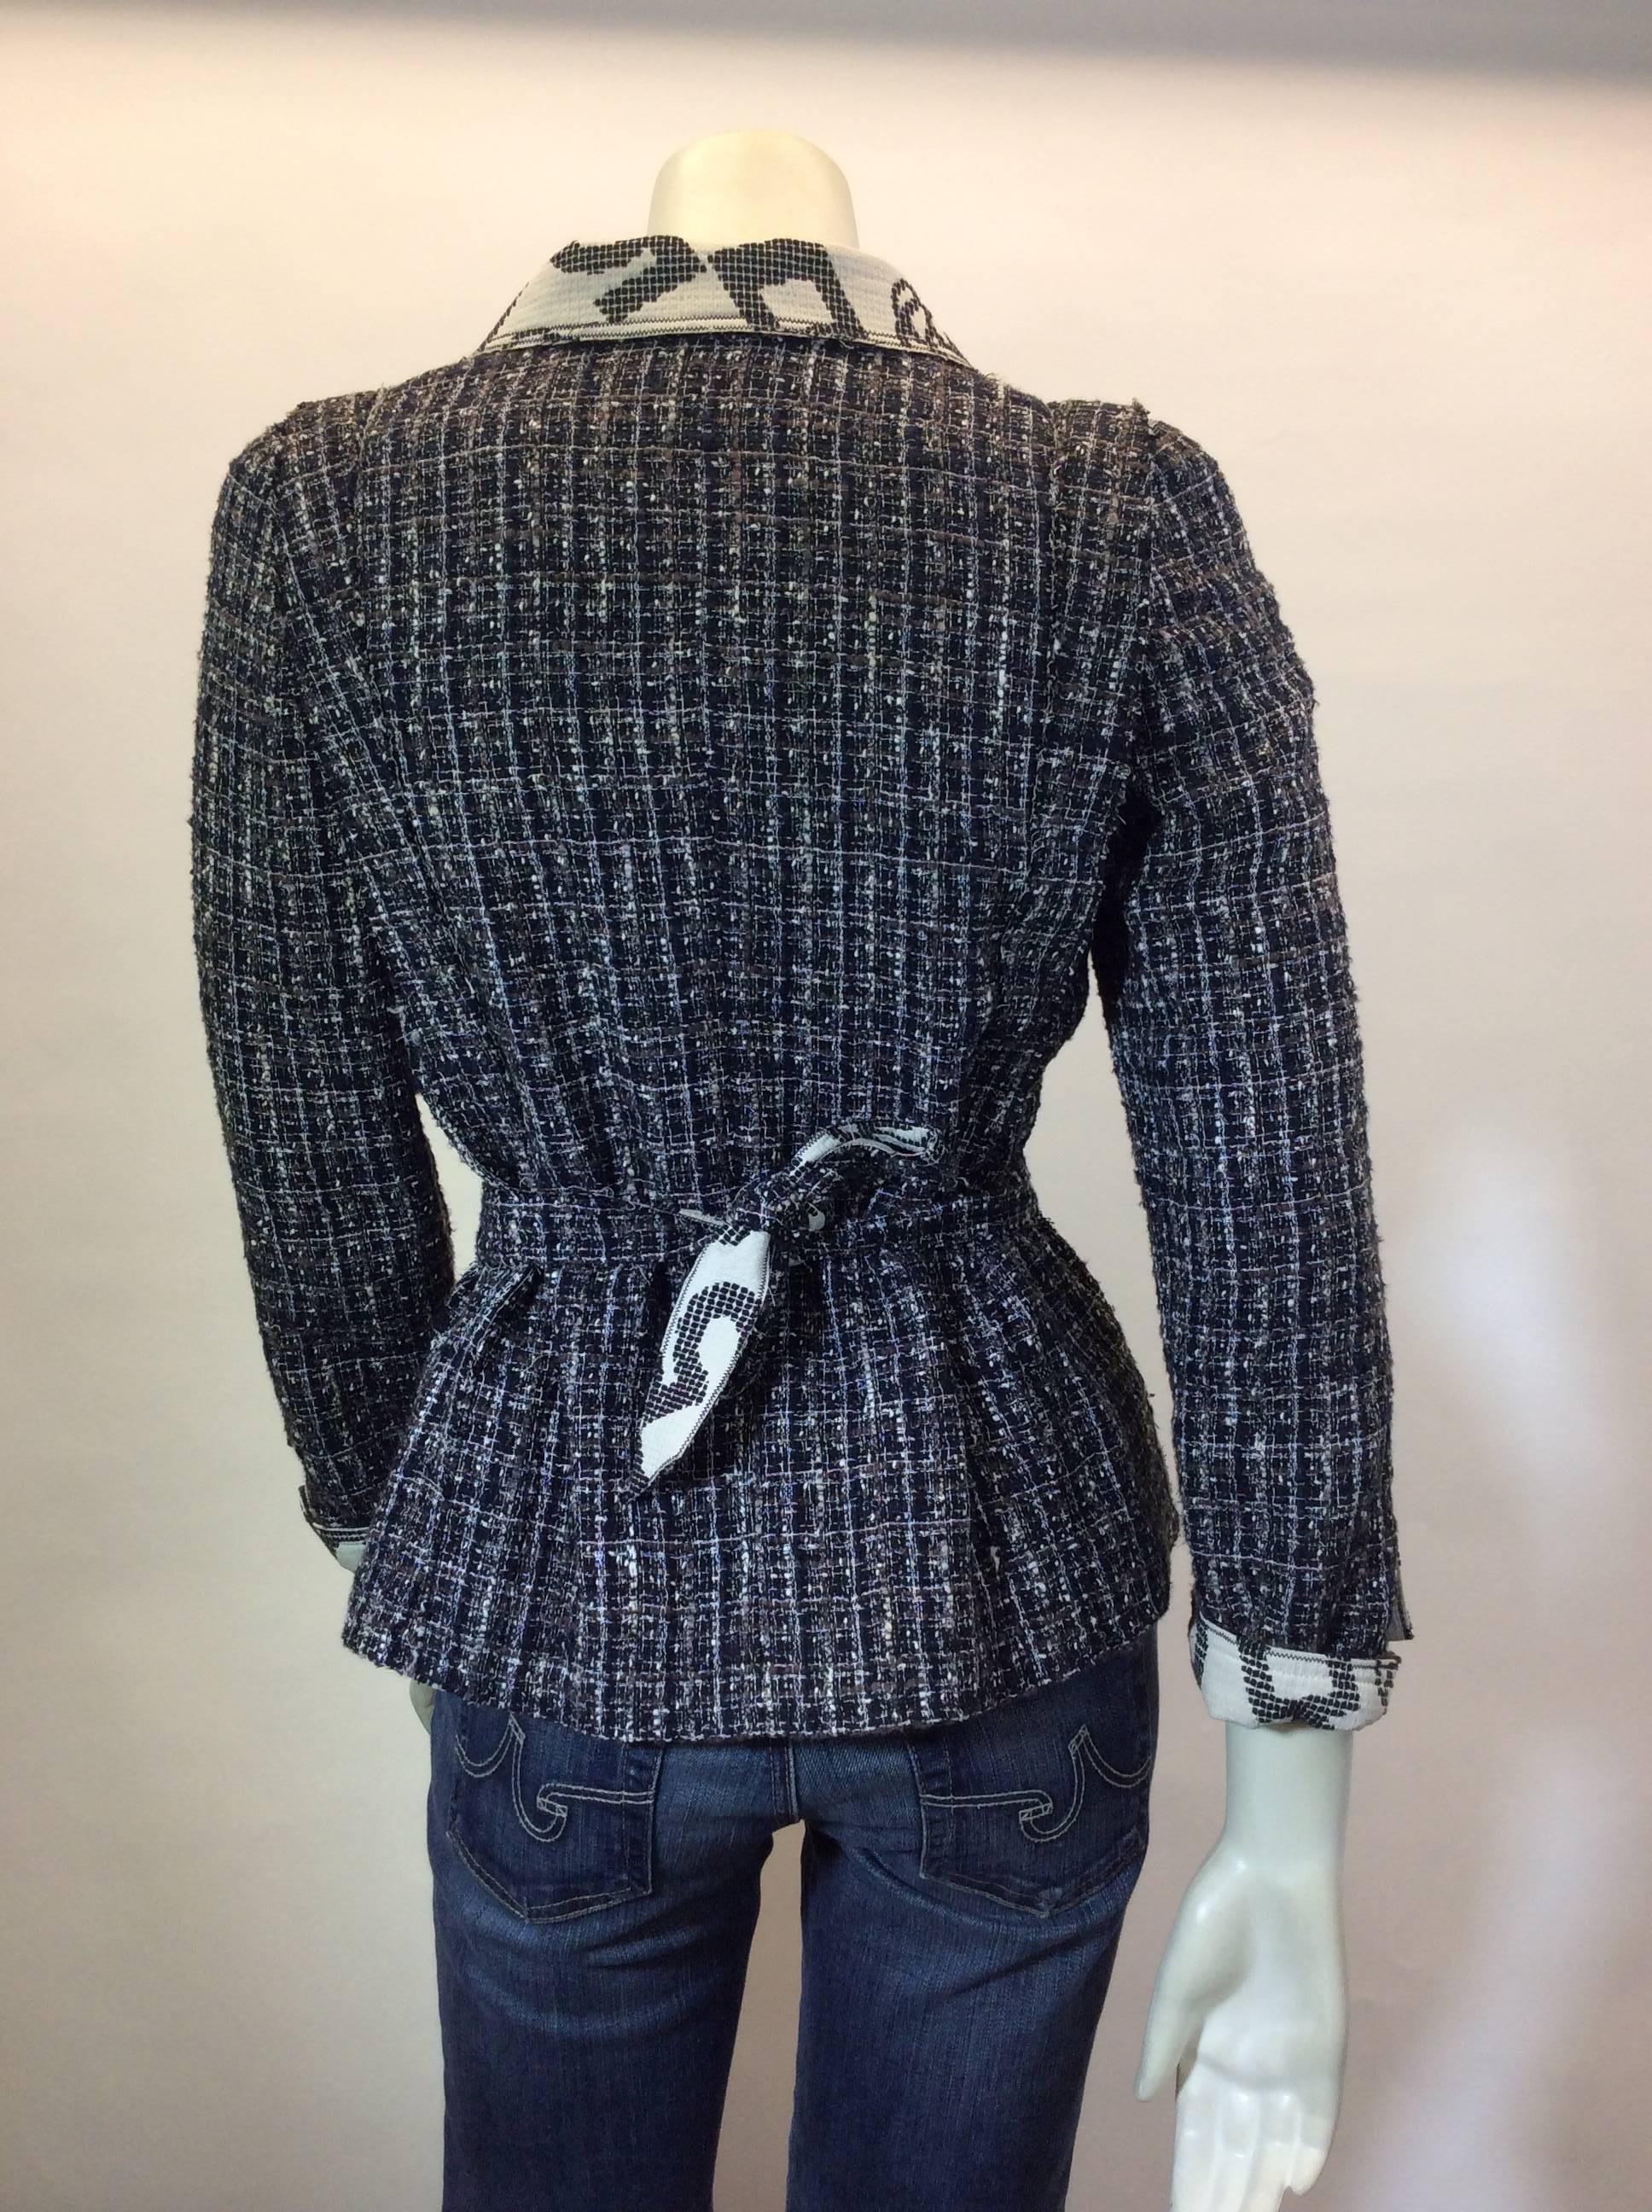 Chanel Navy and Cream Tweed Blazer In Excellent Condition For Sale In Narberth, PA